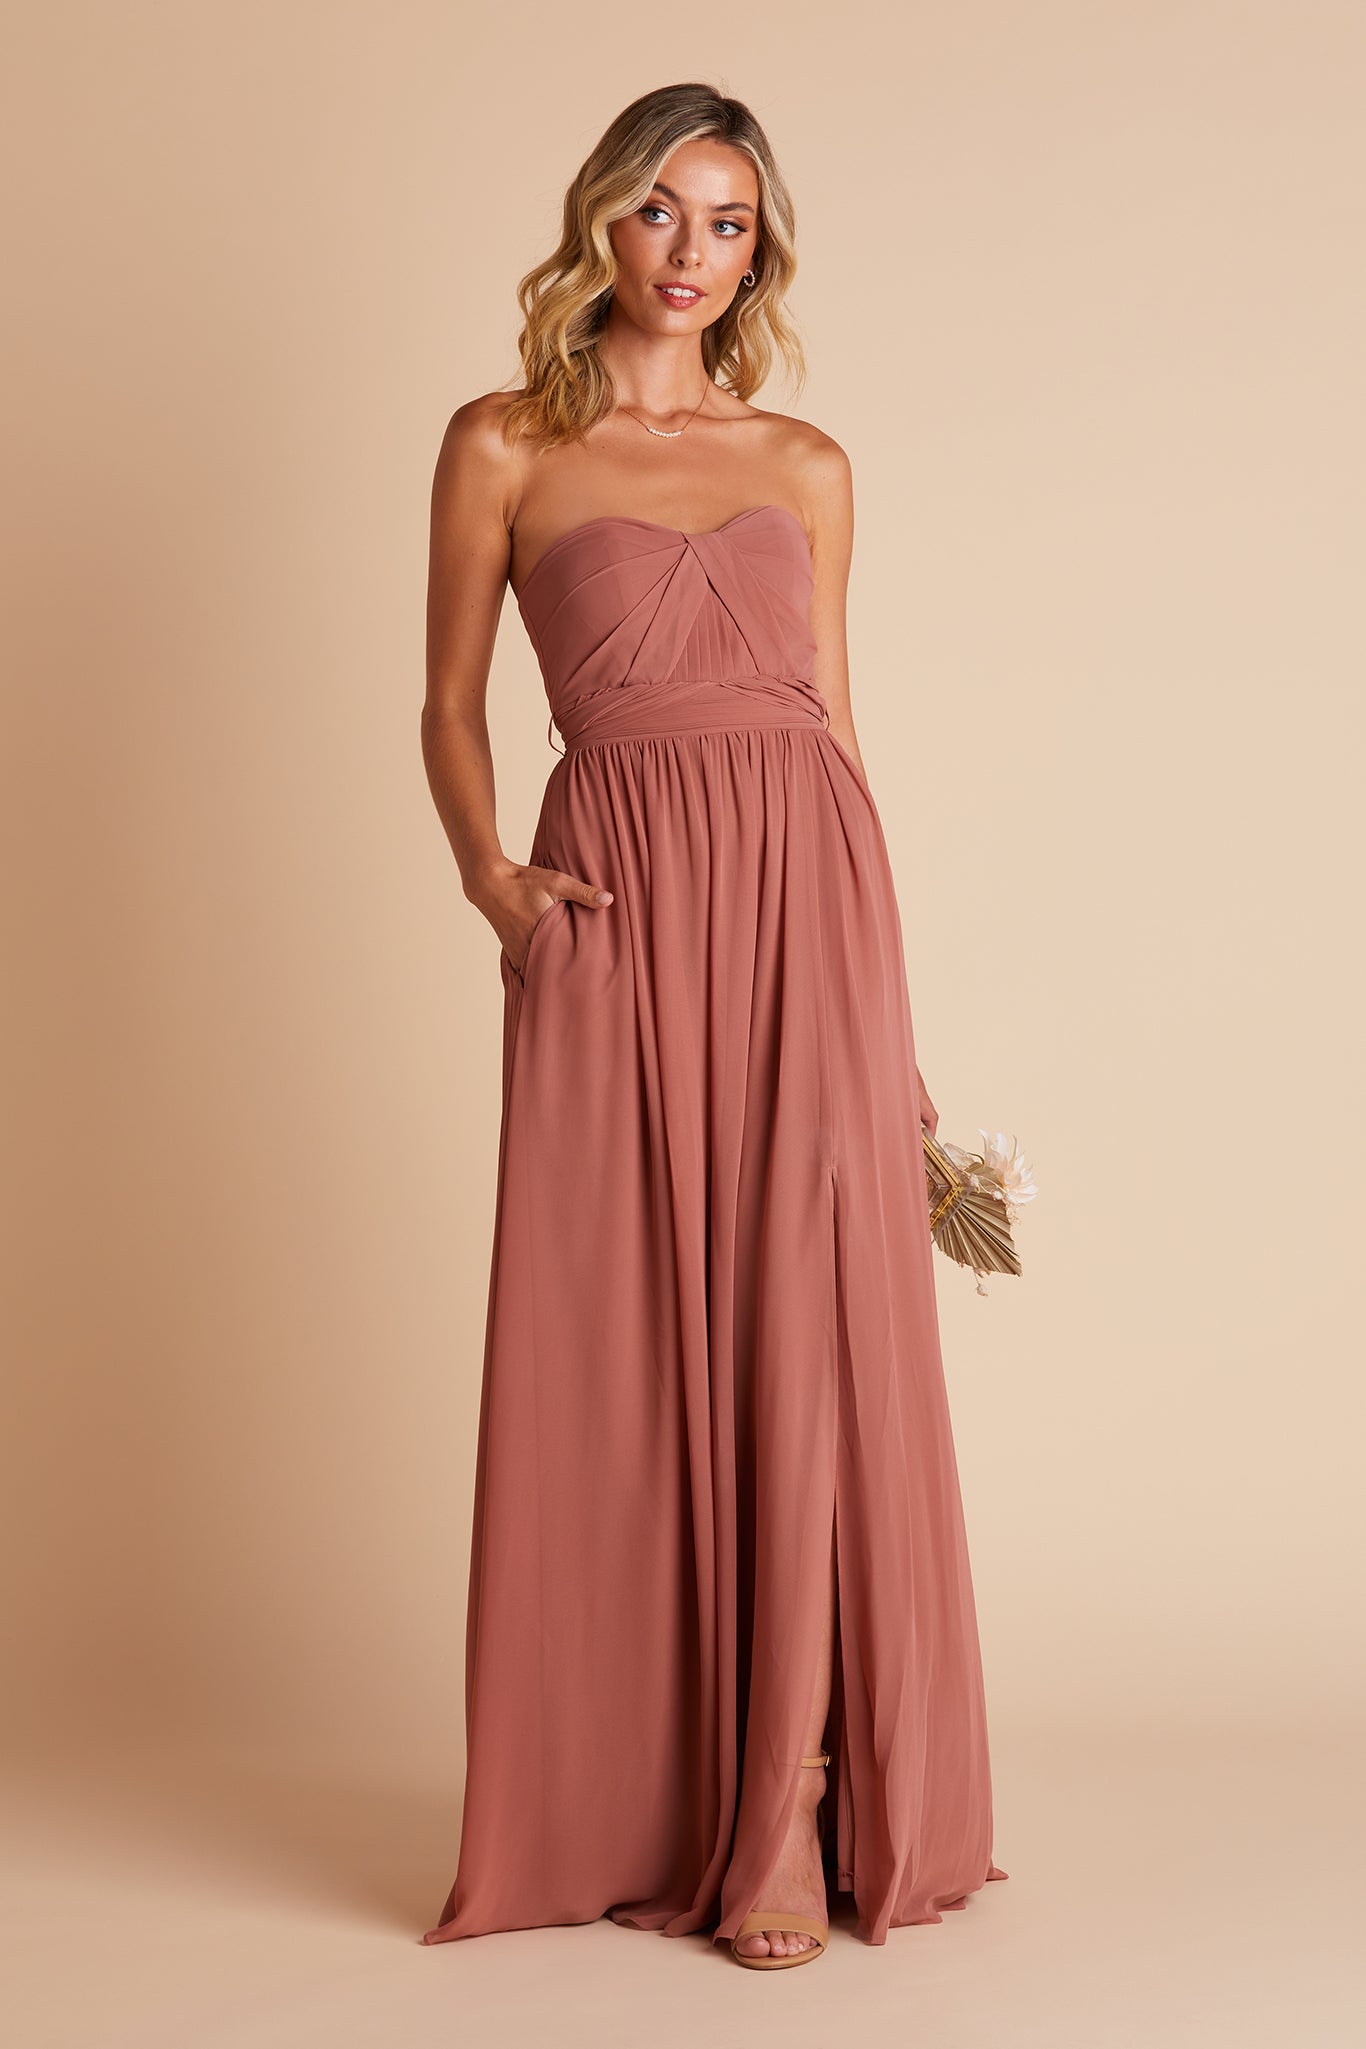 Grace convertible bridesmaid dress with slit in desert rose by Birdy Grey, front view with hand in pocket